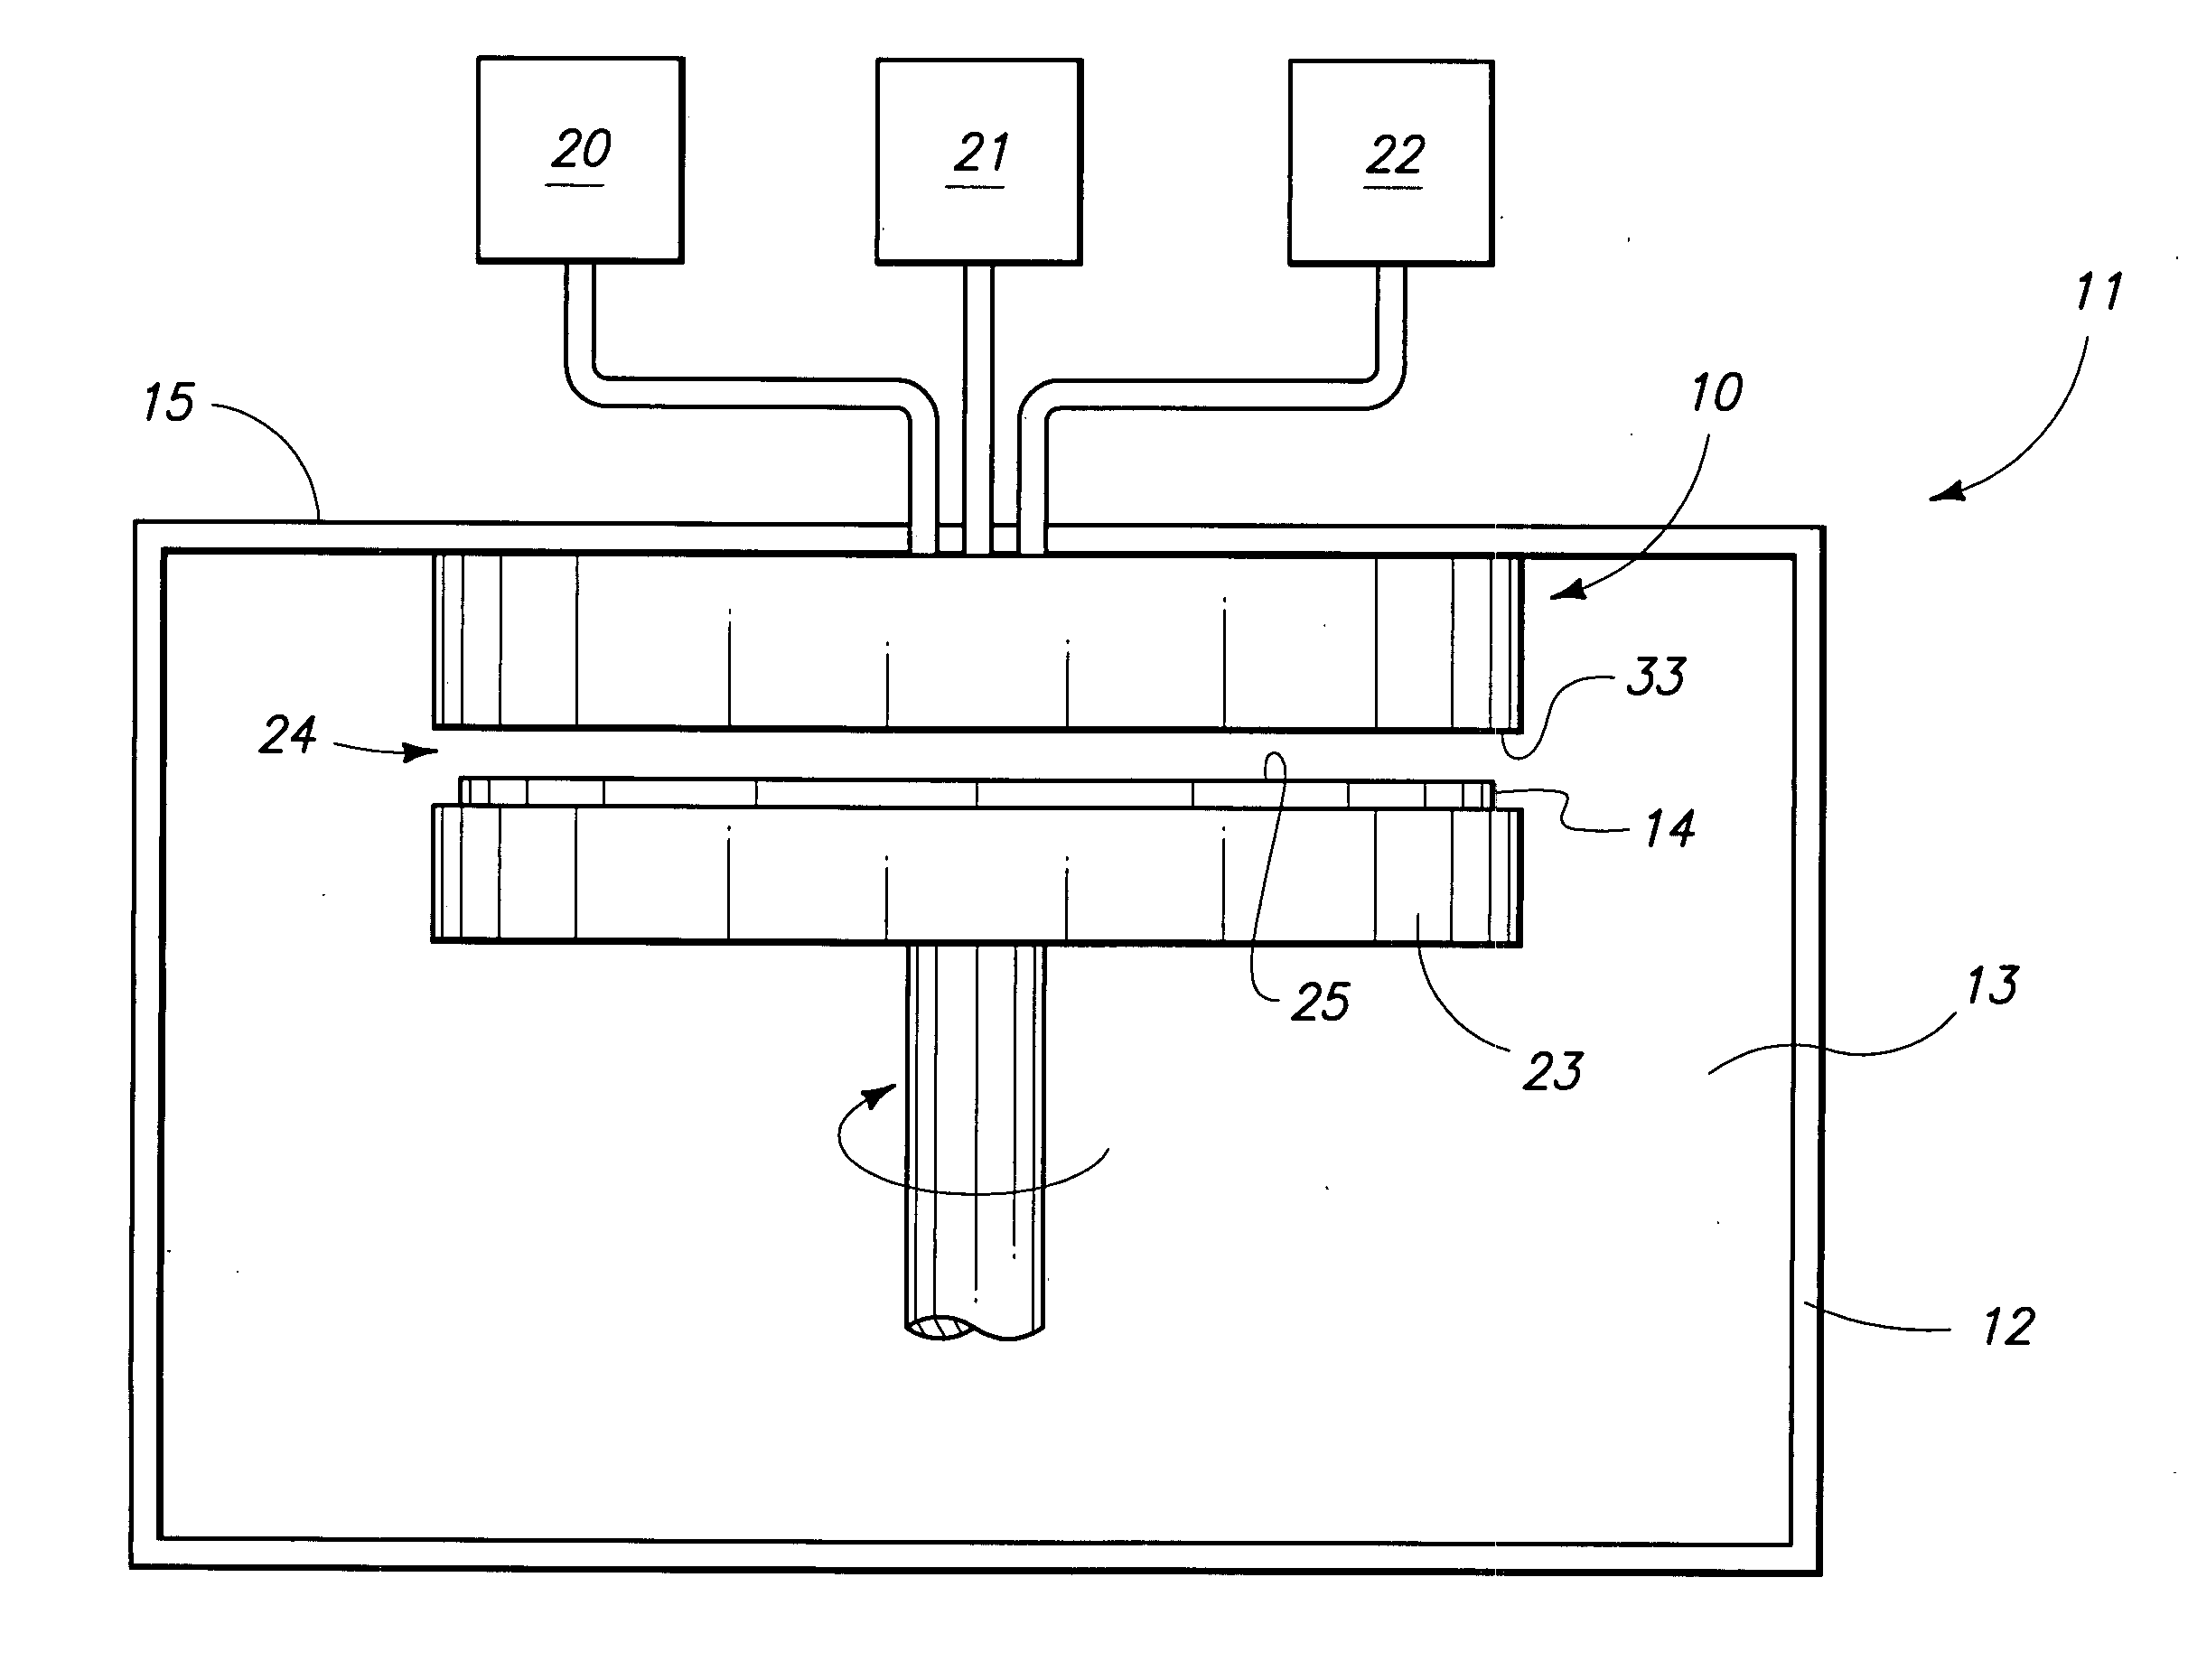 Assembly and method for delivering a reactant material onto a substrate